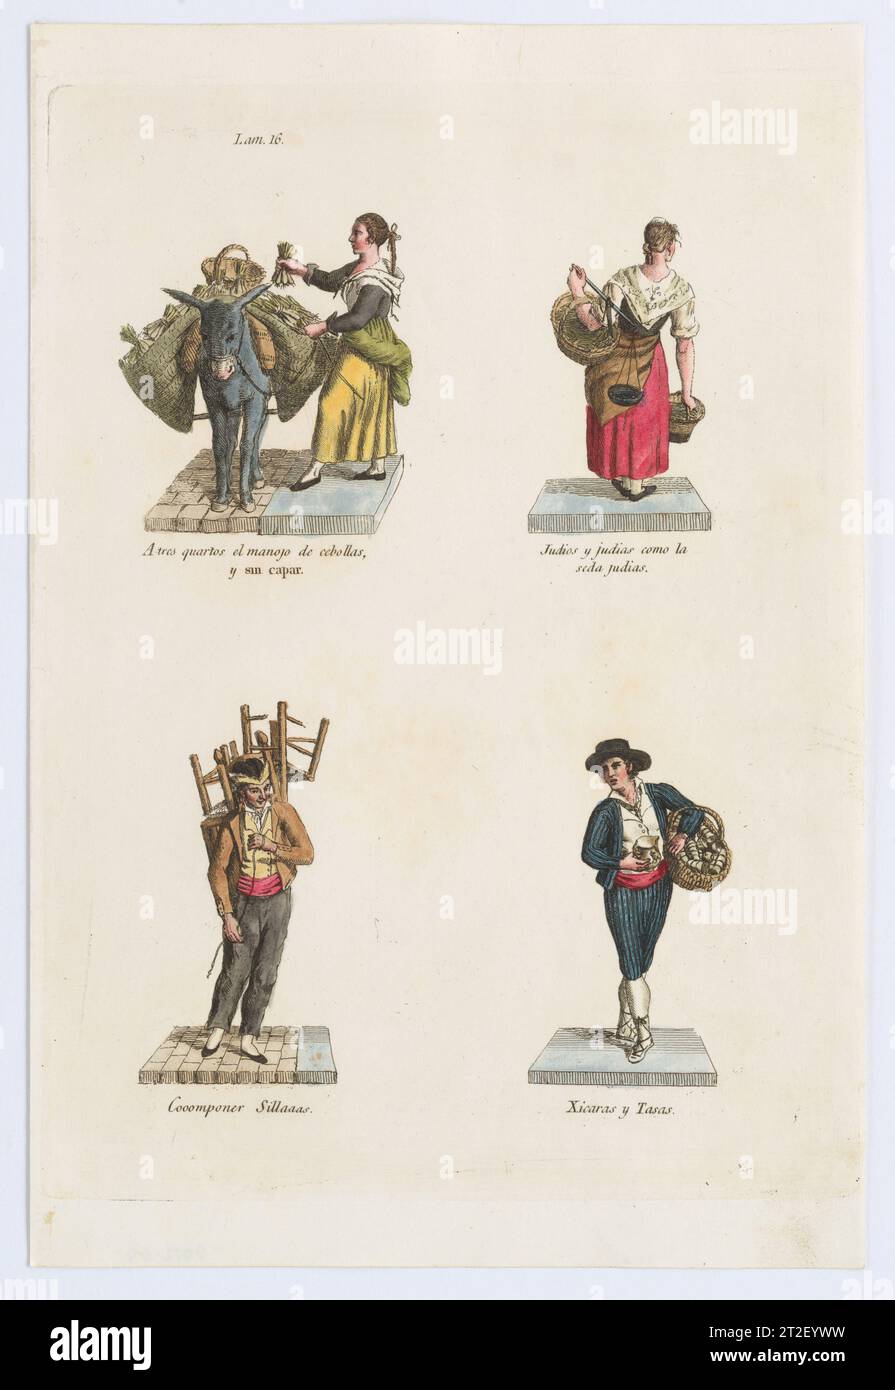 Plate 16: four street vendors from Madrid selling onions, beans, chairs, and crockery, from 'Los Gritos de Madrid' (The Cries of Madrid) Miguel Gamborino Spanish Publisher Imprenta Real, Madrid Spanish 1809–17 See comment for 2022.53. View more. Plate 16: four street vendors from Madrid selling onions, beans, chairs, and crockery, from 'Los Gritos de Madrid' (The Cries of Madrid). Miguel Gamborino (Spanish, Valencia 1760–1828 Madrid). 1809–17. Engraving with hand coloring. Imprenta Real, Madrid. Prints Stock Photo